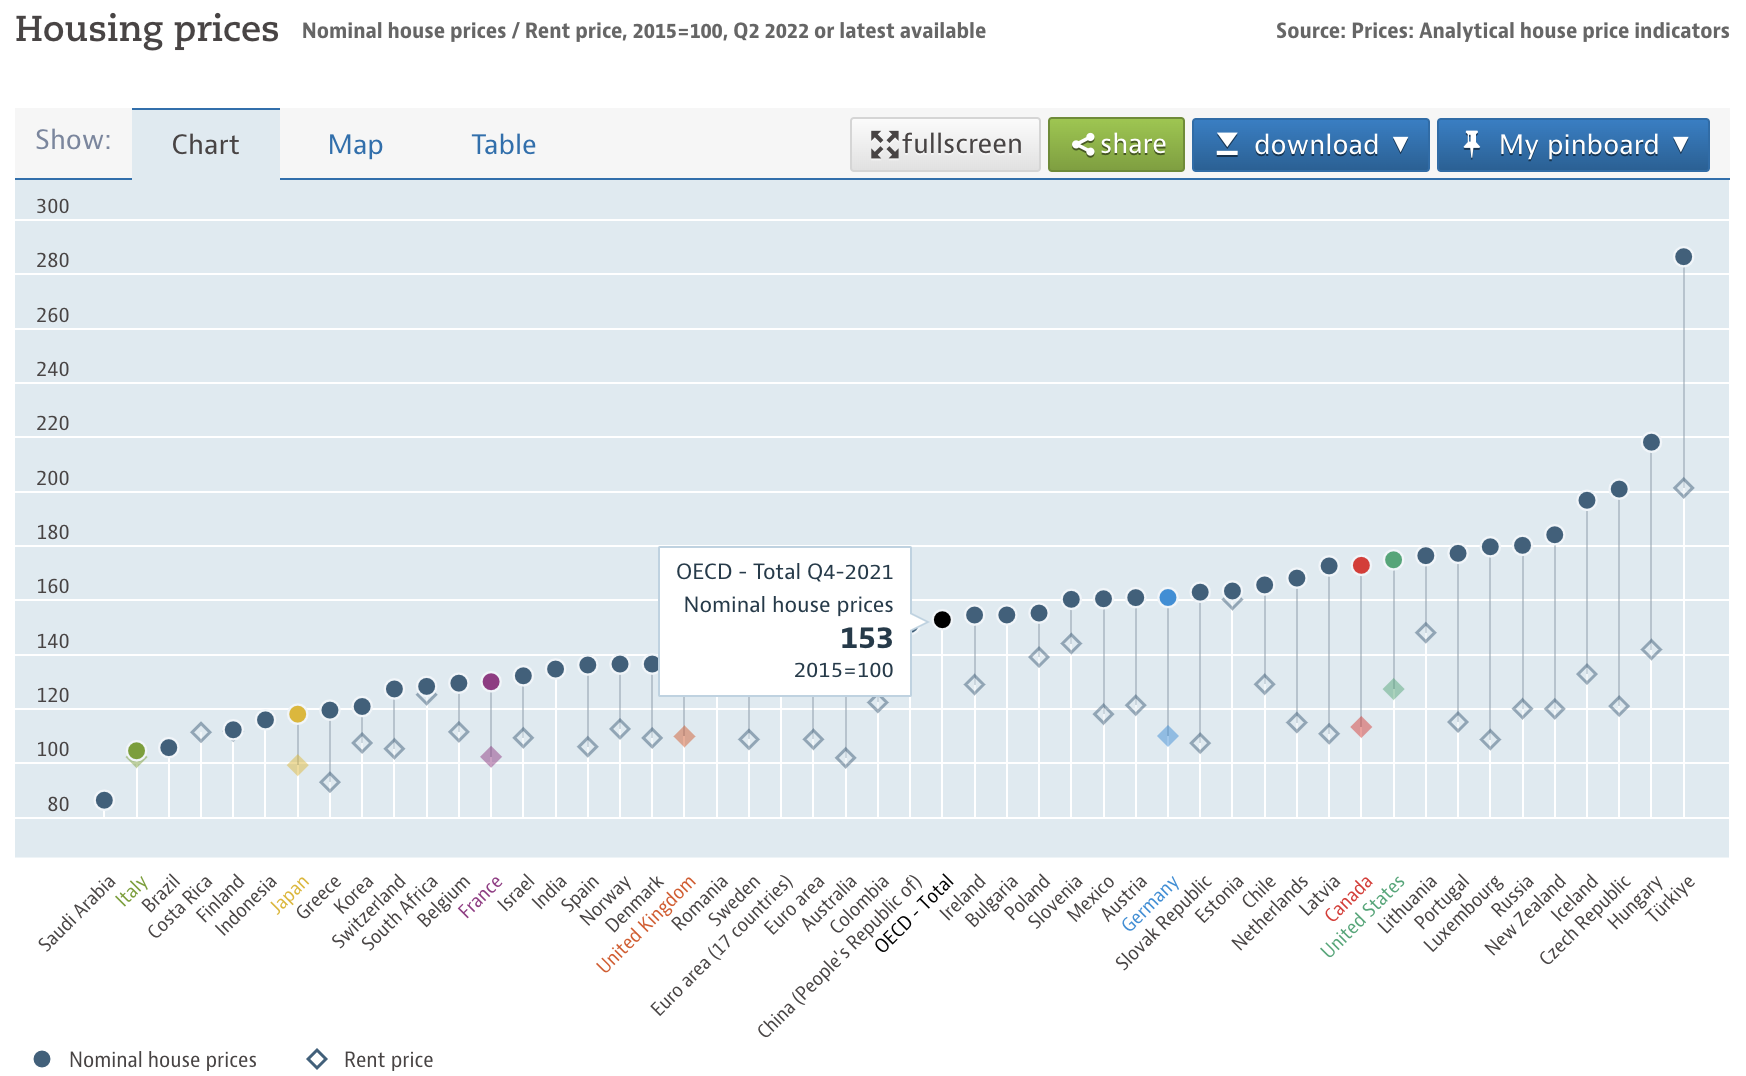 Source: https://data.oecd.org/price/housing-prices.htm